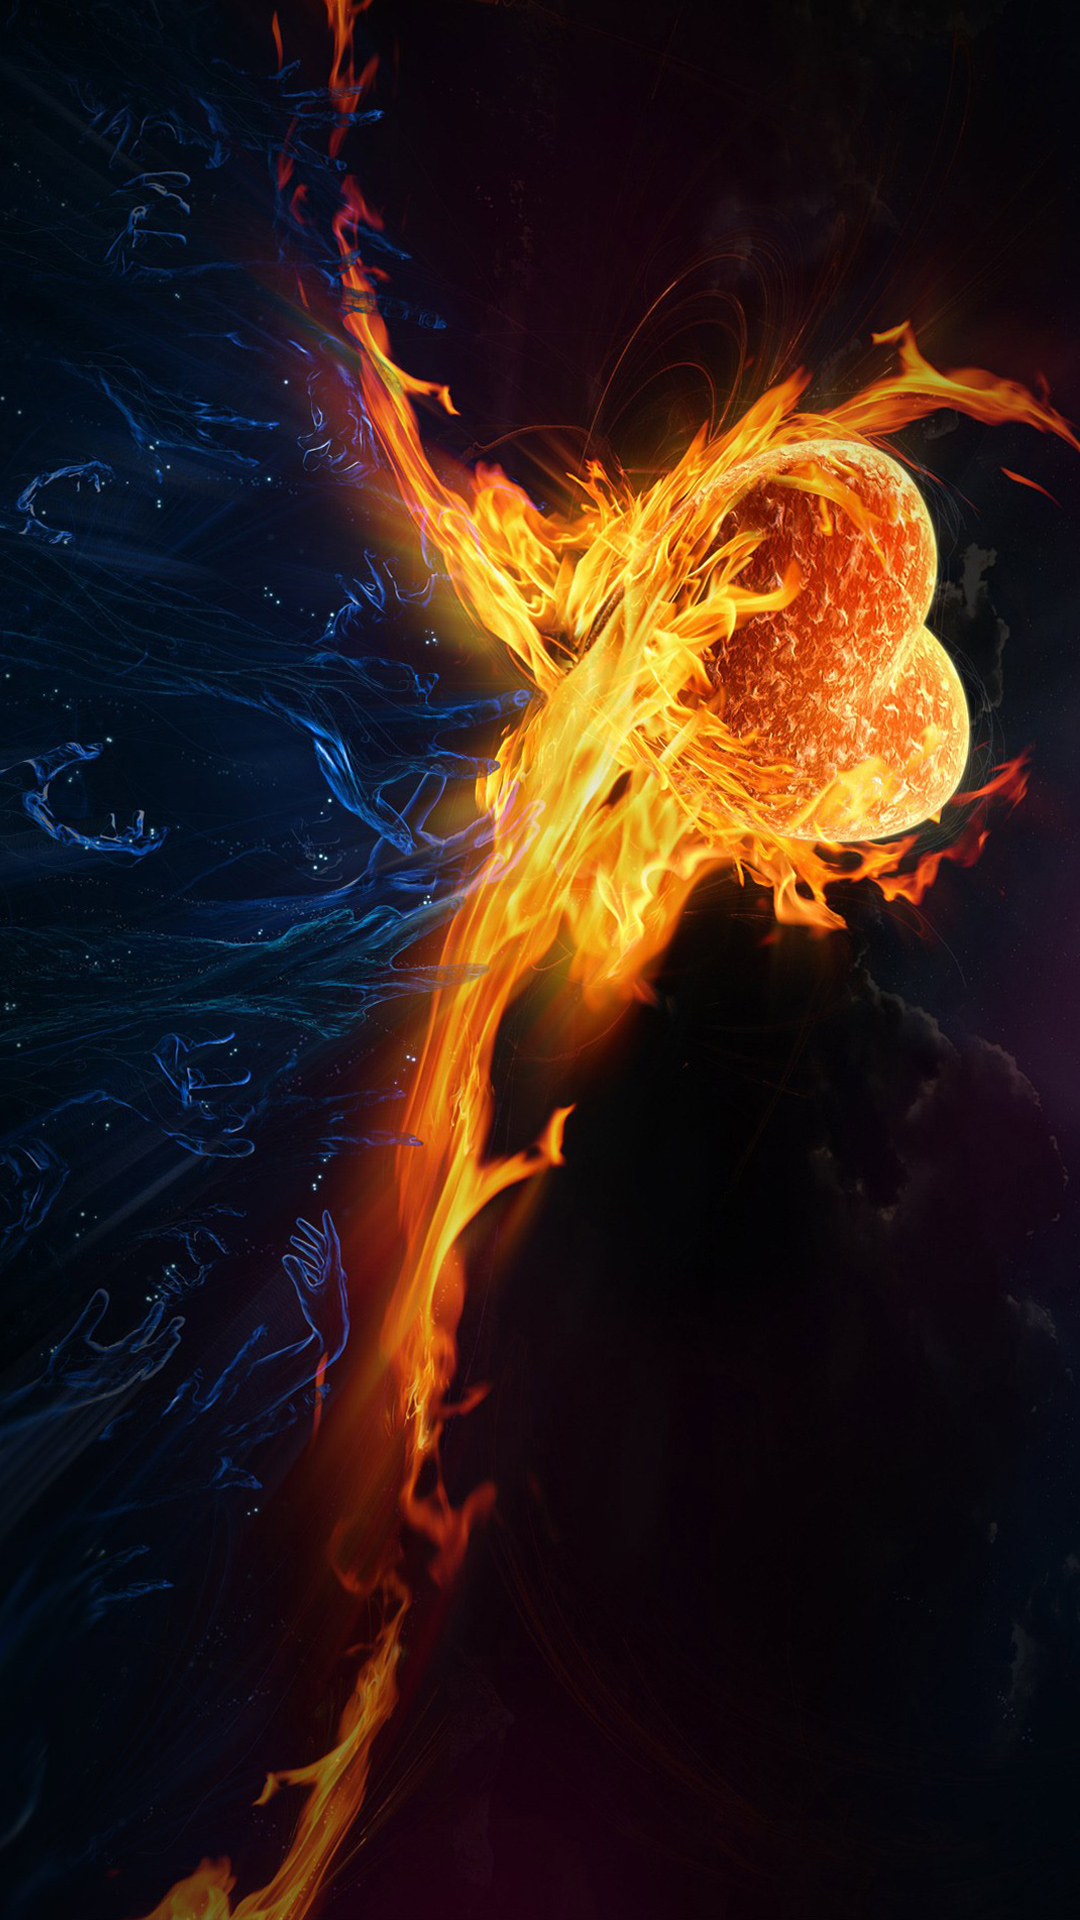 Fire Heart Abstract Full HD Smartphone Wallpaper | Gallery ...